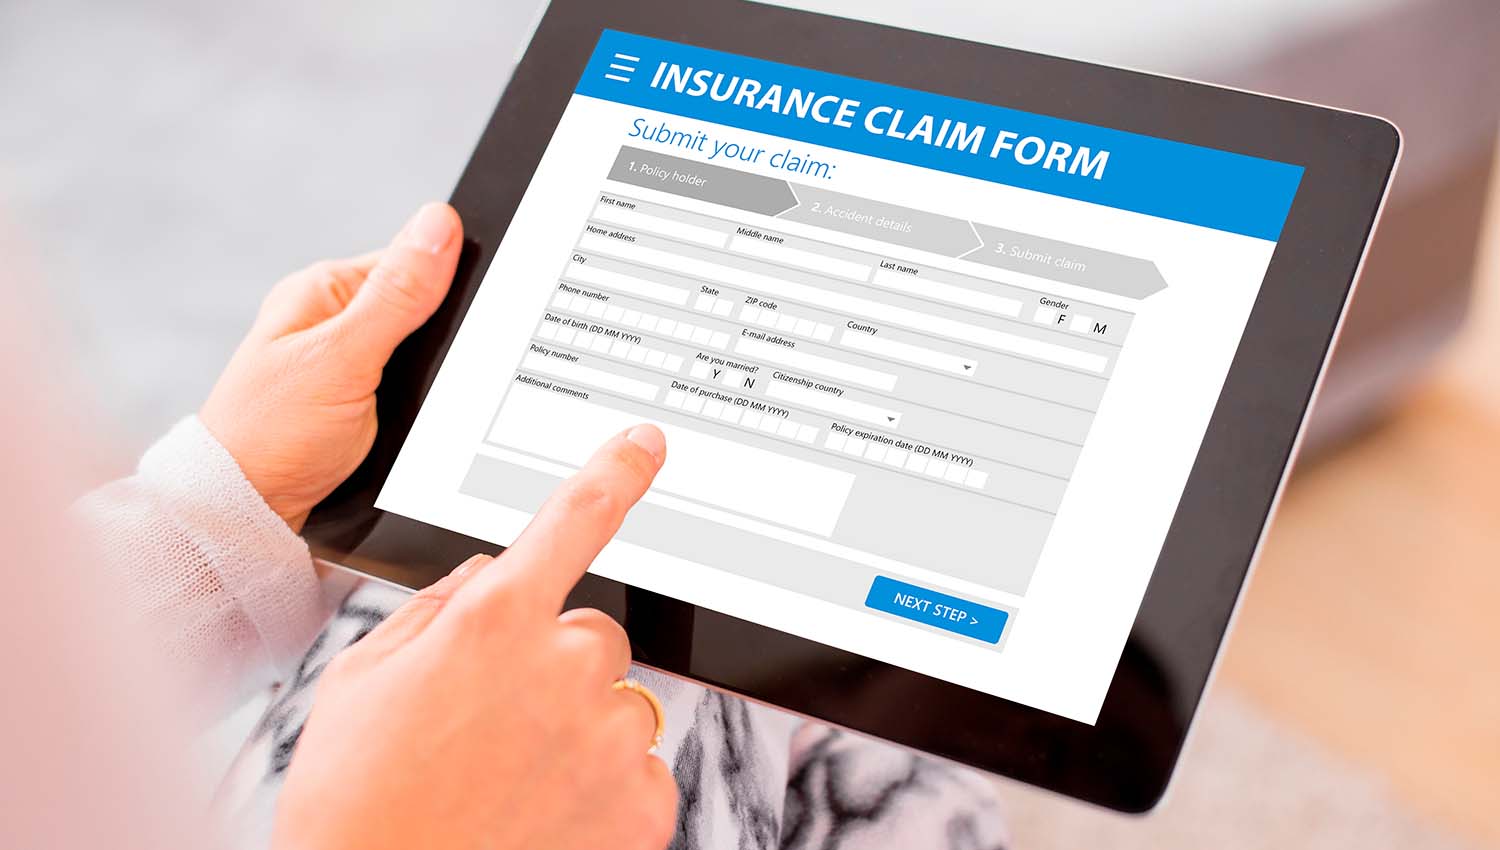 The Future of Insurance Claims Processing: How AI and GPT Models are Changing the Game